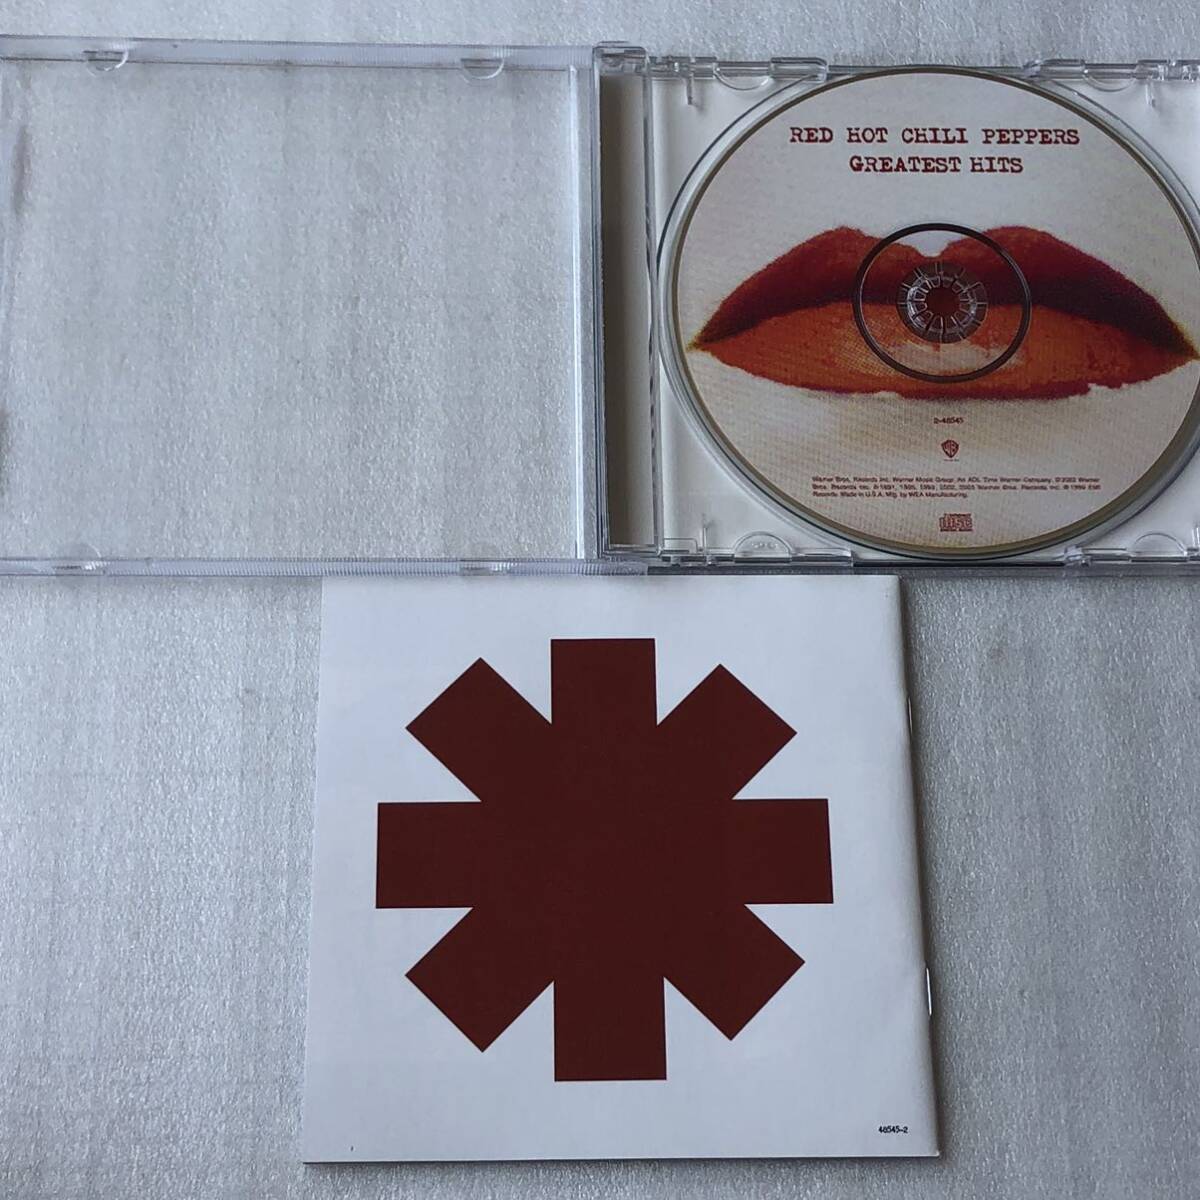  б/у CD Red Hot Chili Peppers /Greatest Hits(2003 год )